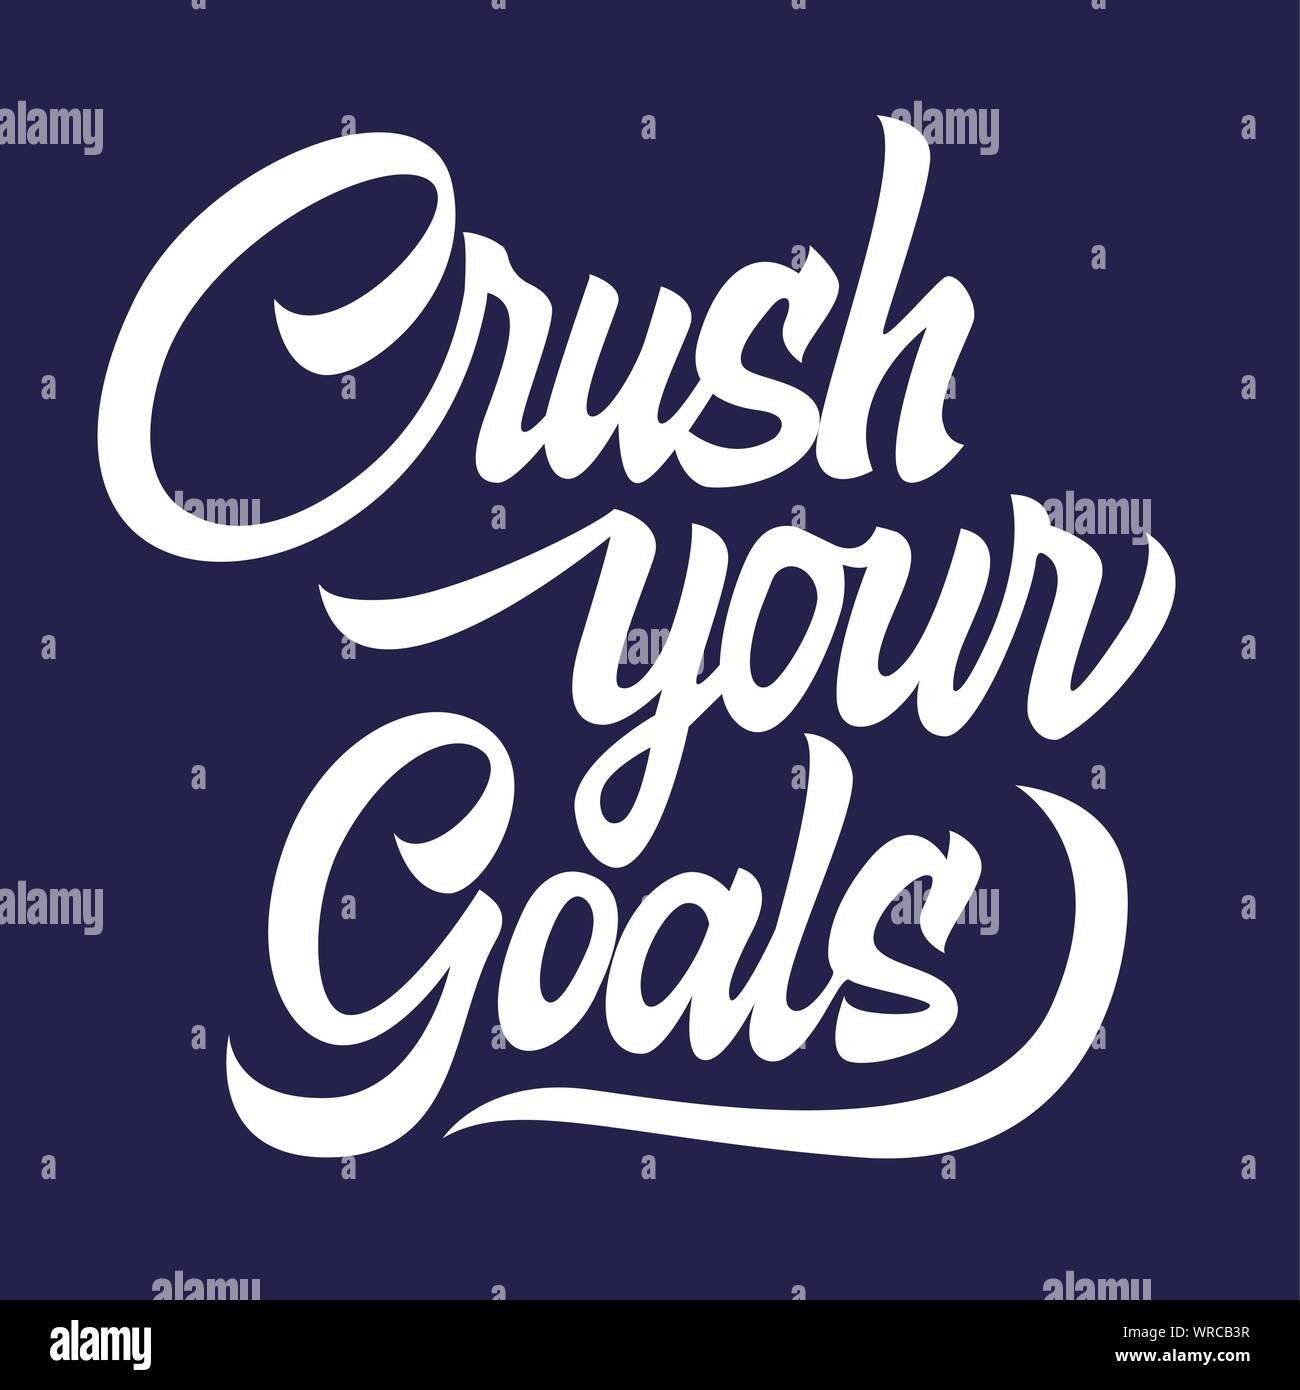 Crush your goals black lettering isolated, motivating phrase Stock Vector